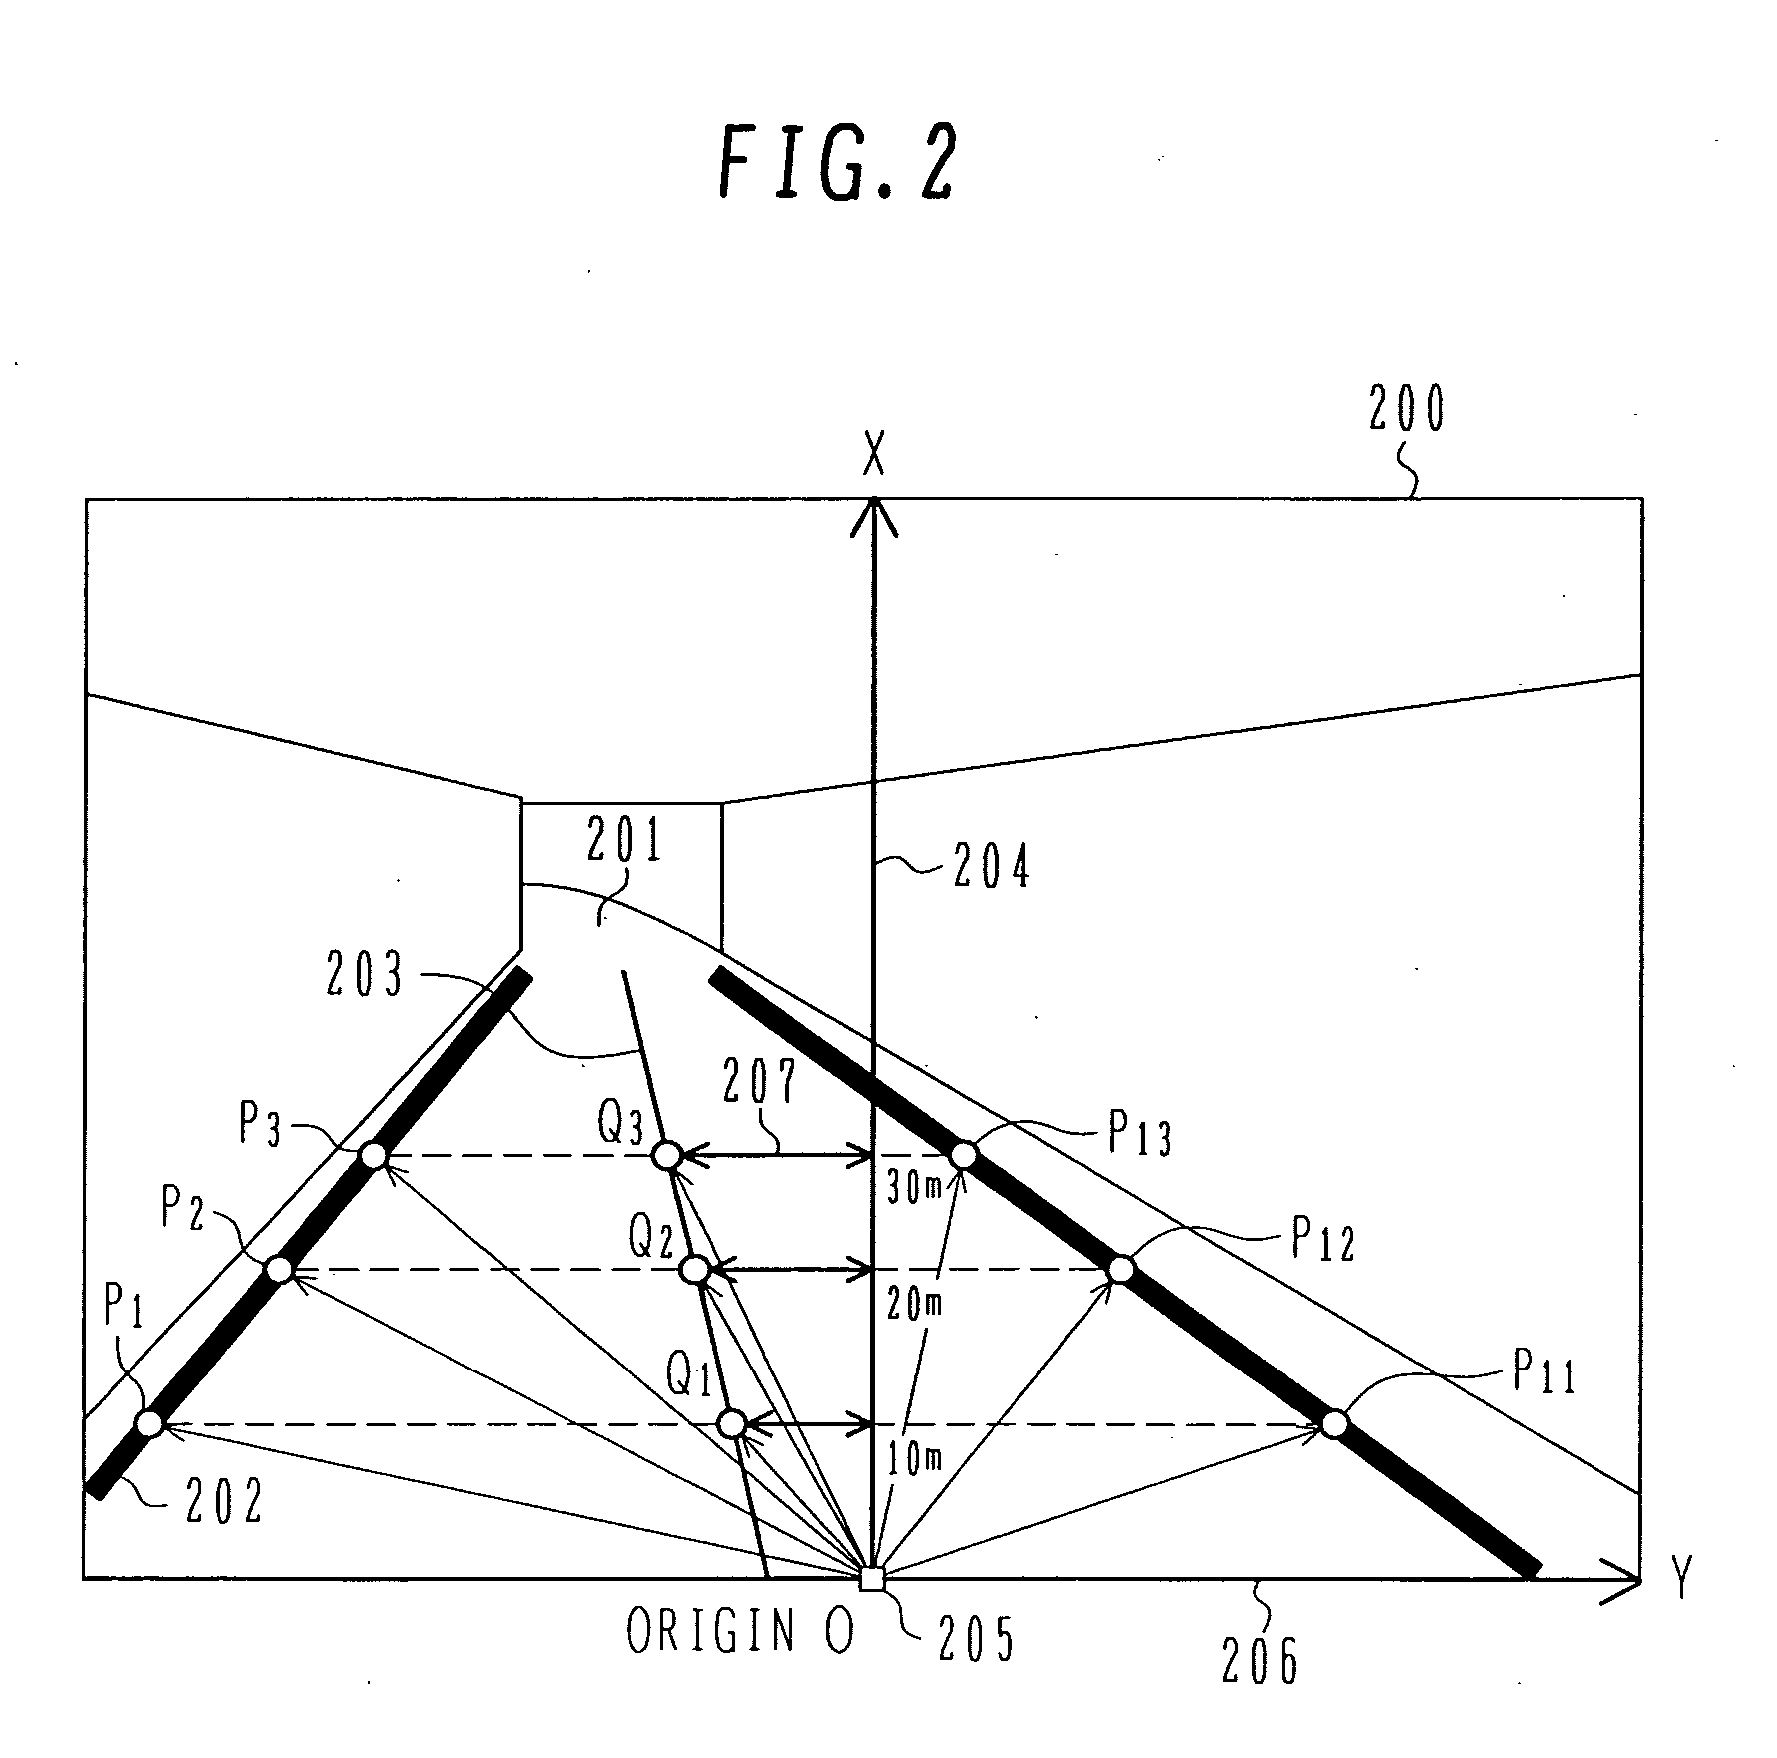 Cruise Control System for a Vehicle